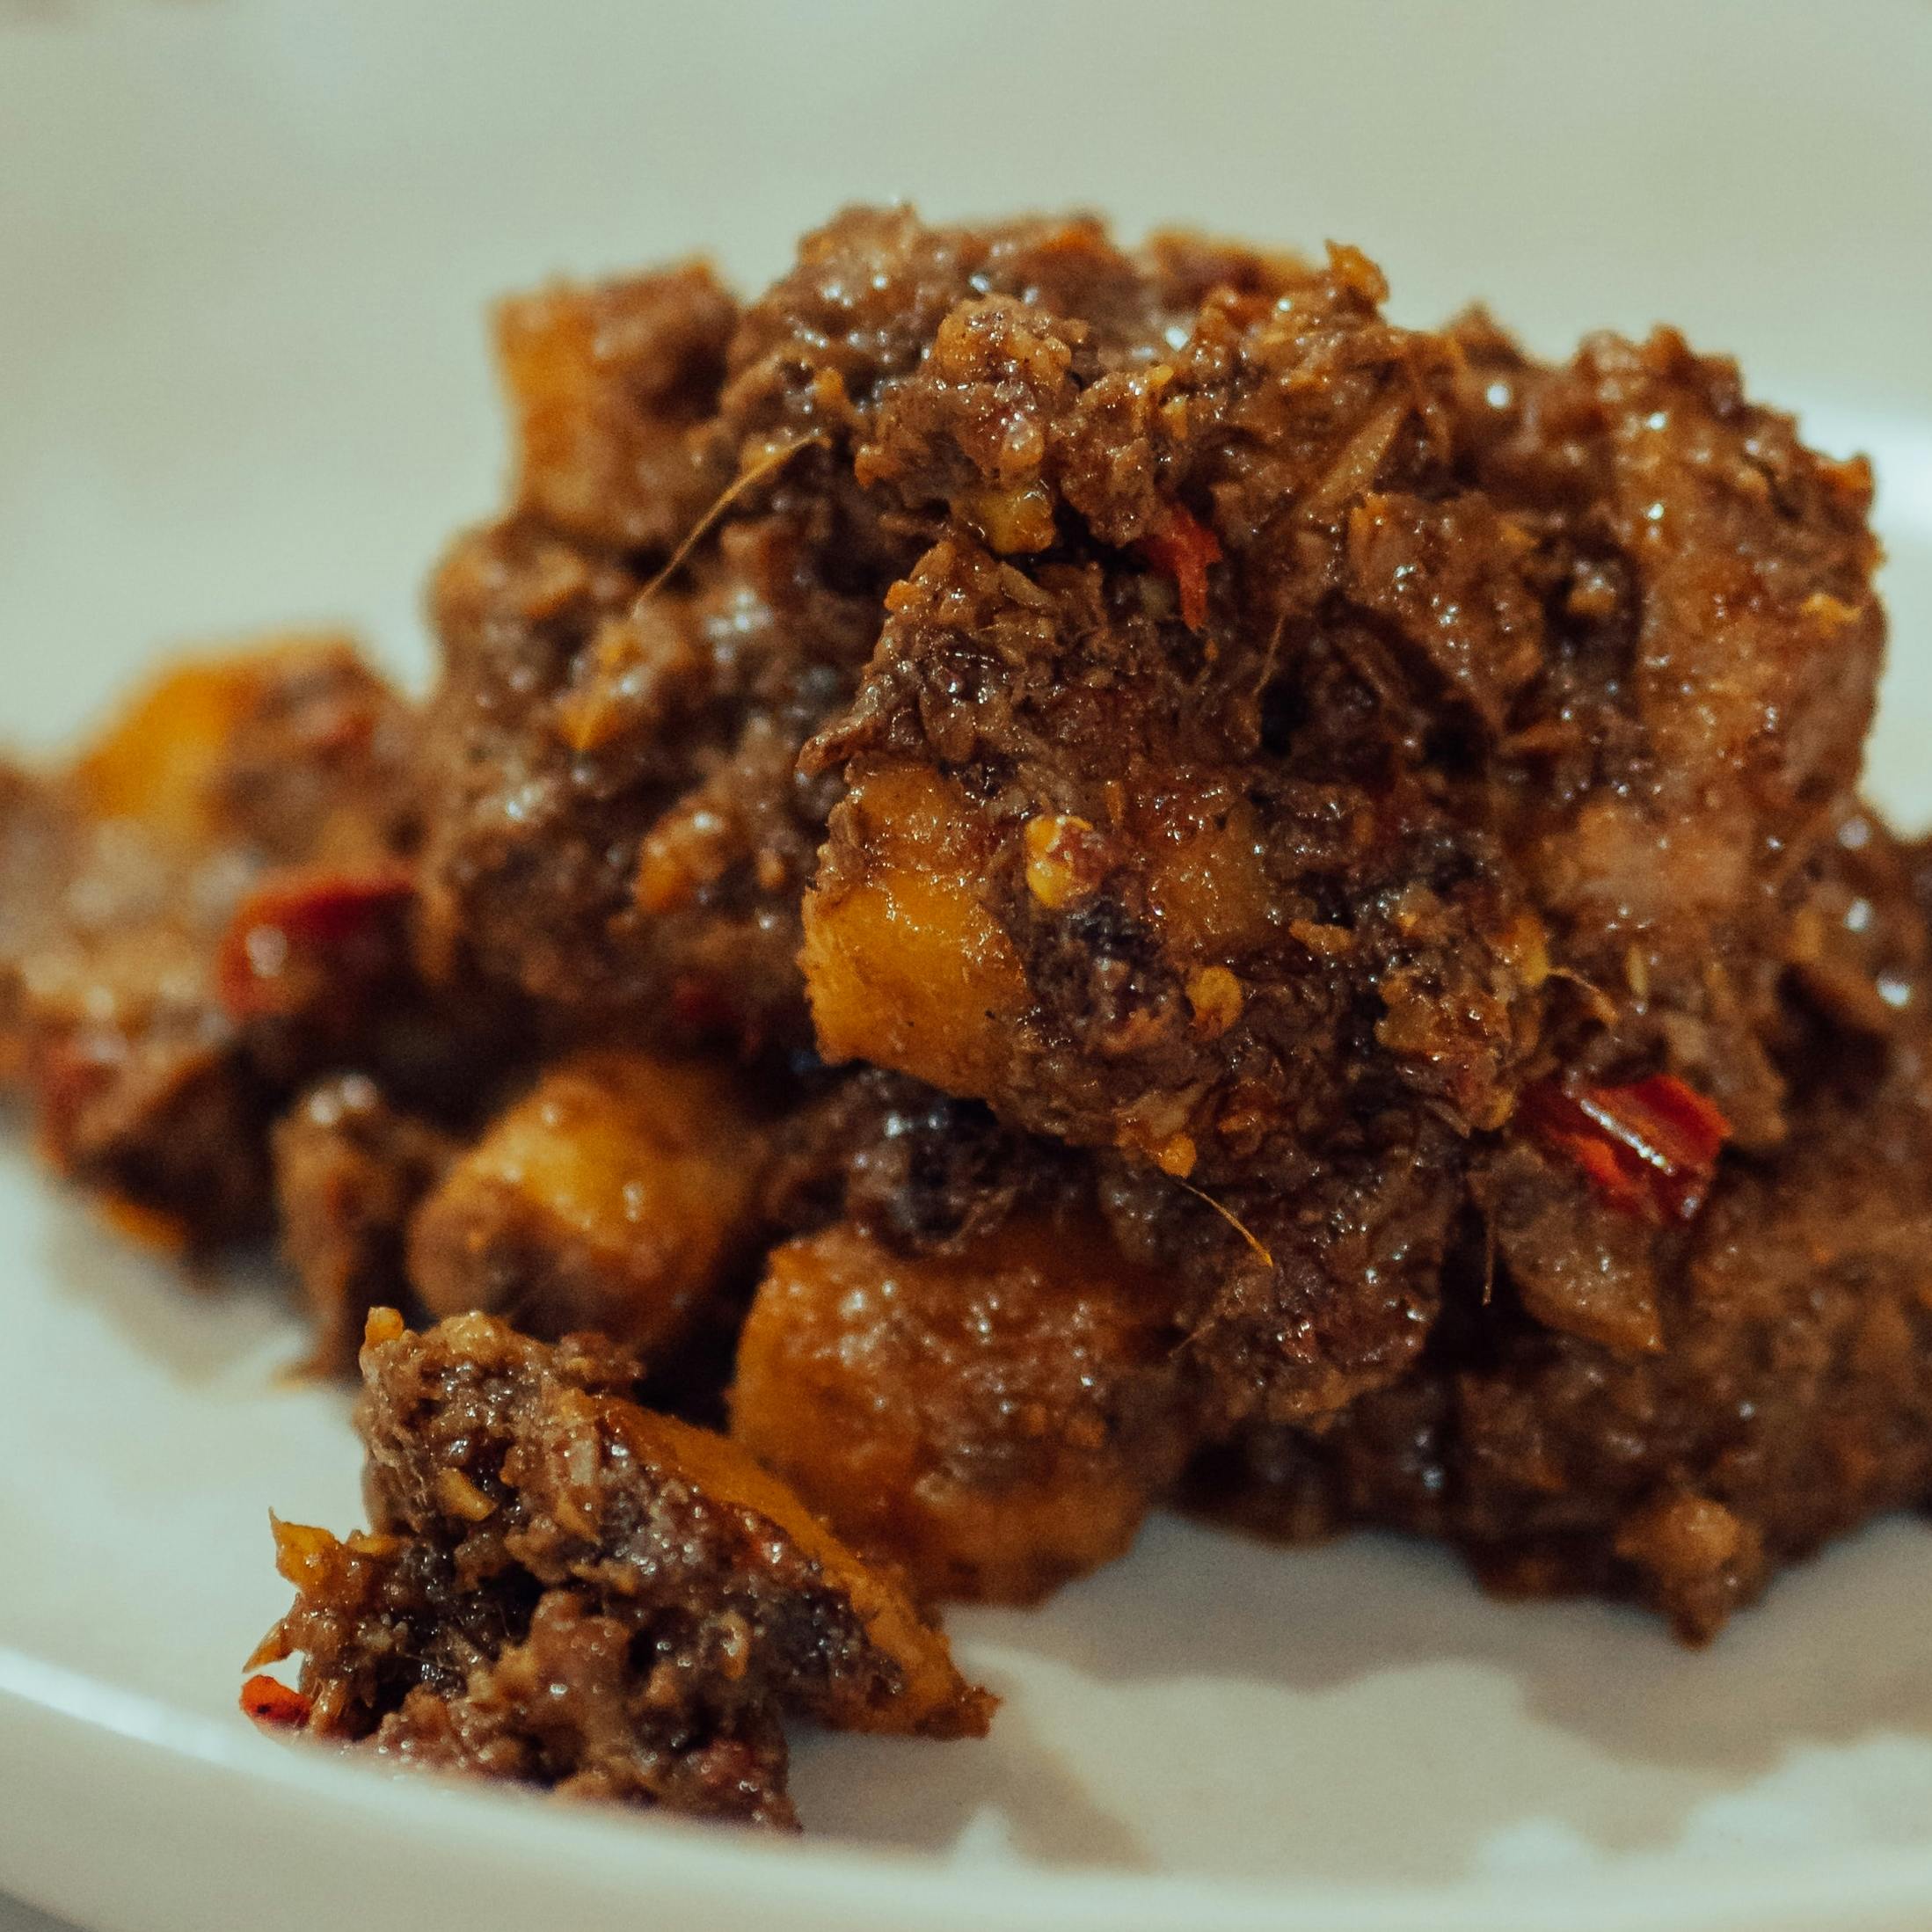 Rendang - Slow cooked Dry Curry